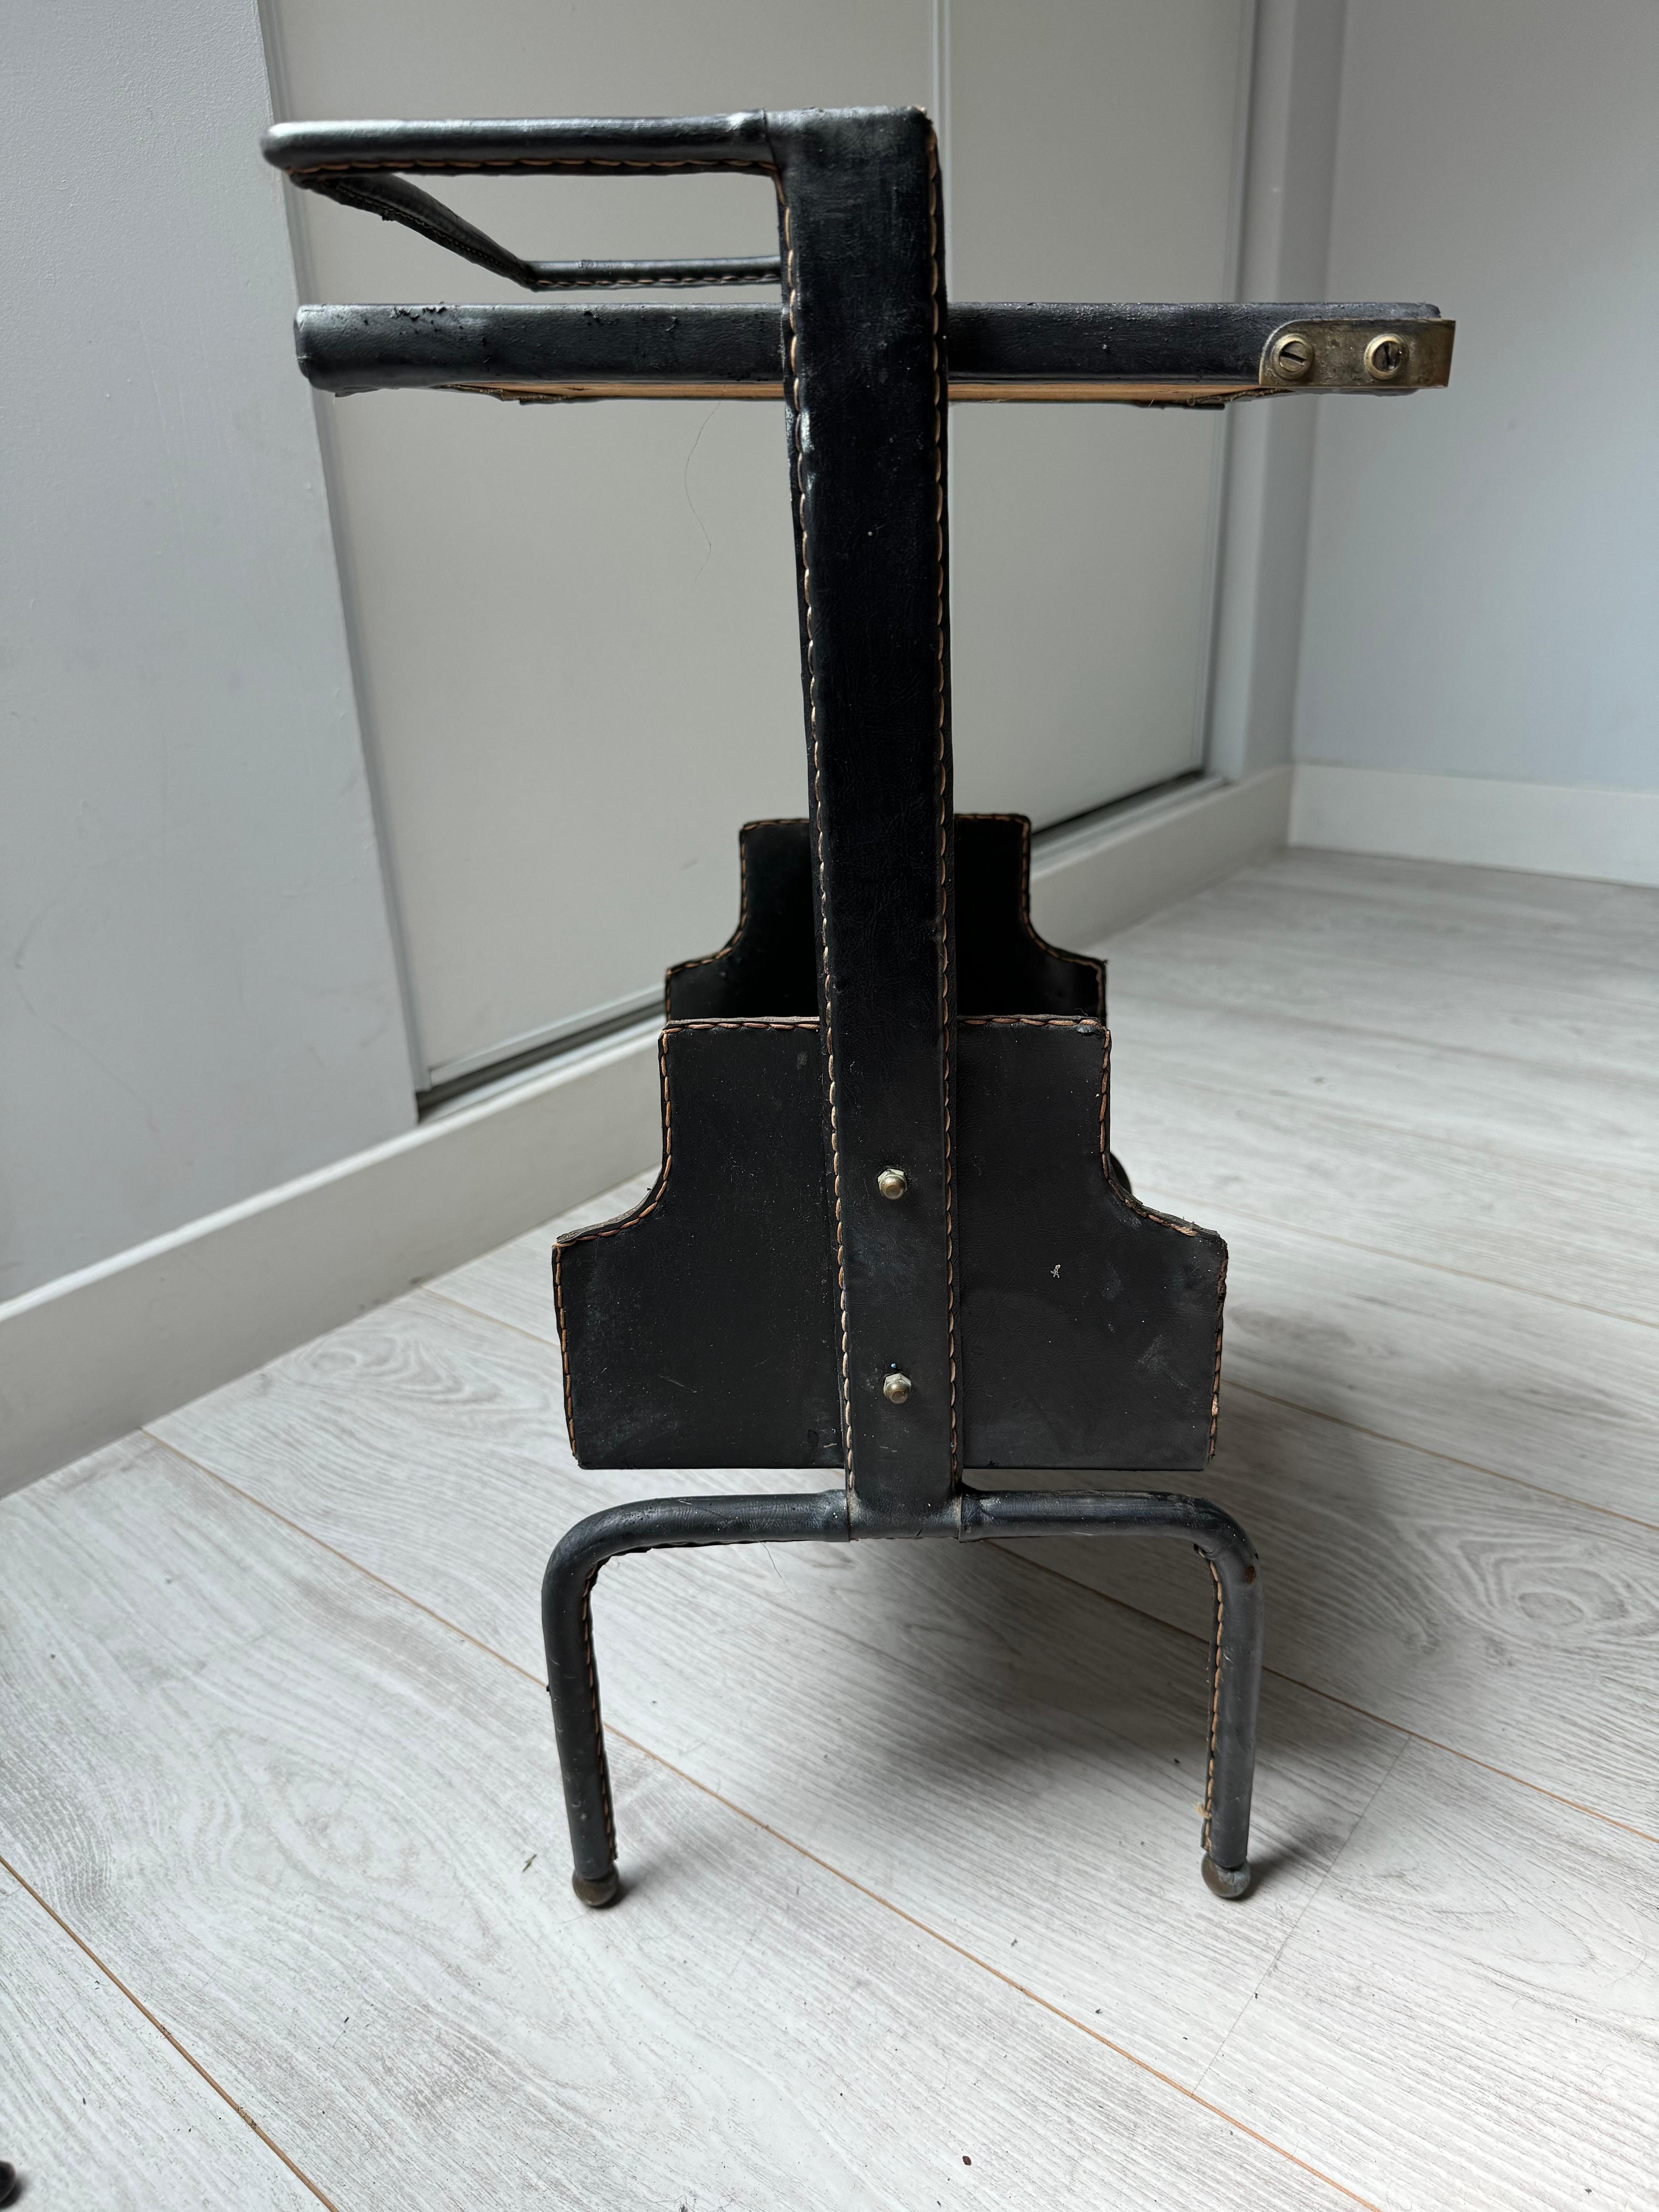 Jacques ADNET (1900-1984) 
Small side table with double trail leather covered \with brass hardware and contrast stitching
Originally designed as a telephone table